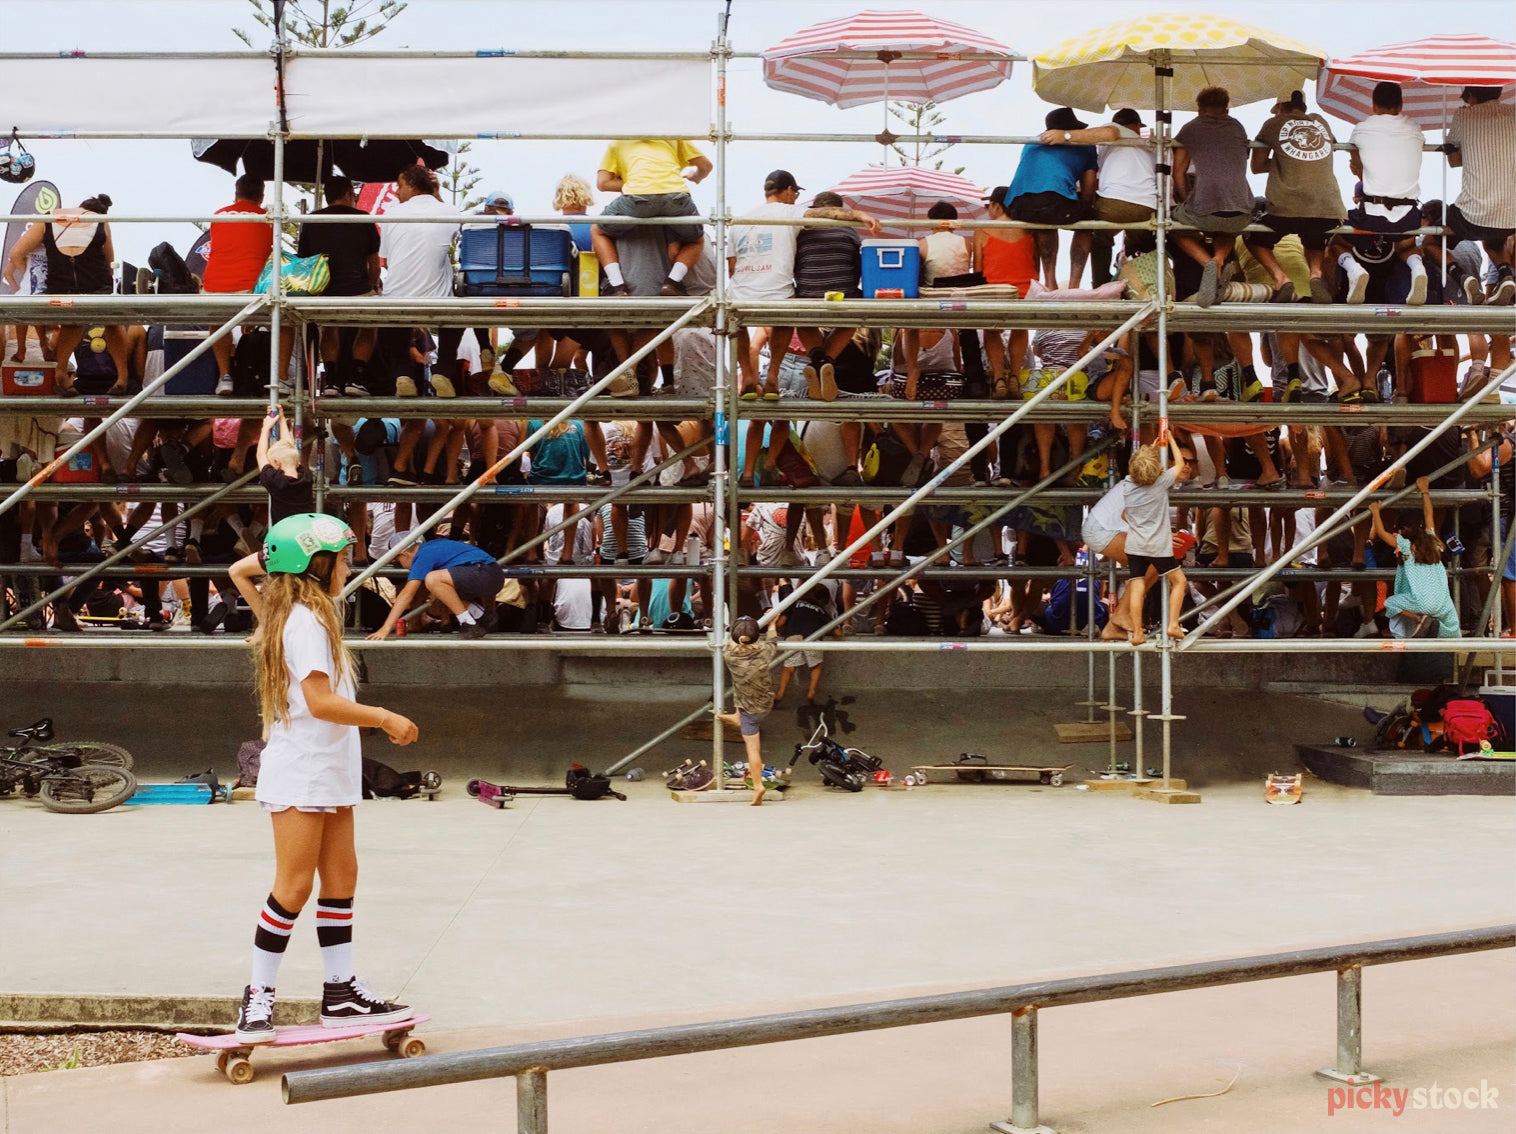 A young girl in a retro outfit and green helmet skates on sand behind a grandstand event crowd. She casually has her hair out and looks effortless while everyone else on the grandstand behind her looks to be watching something in front of them. There's retro coloured umbrellas dotting the stand and another child climbs the railing to also watch. 